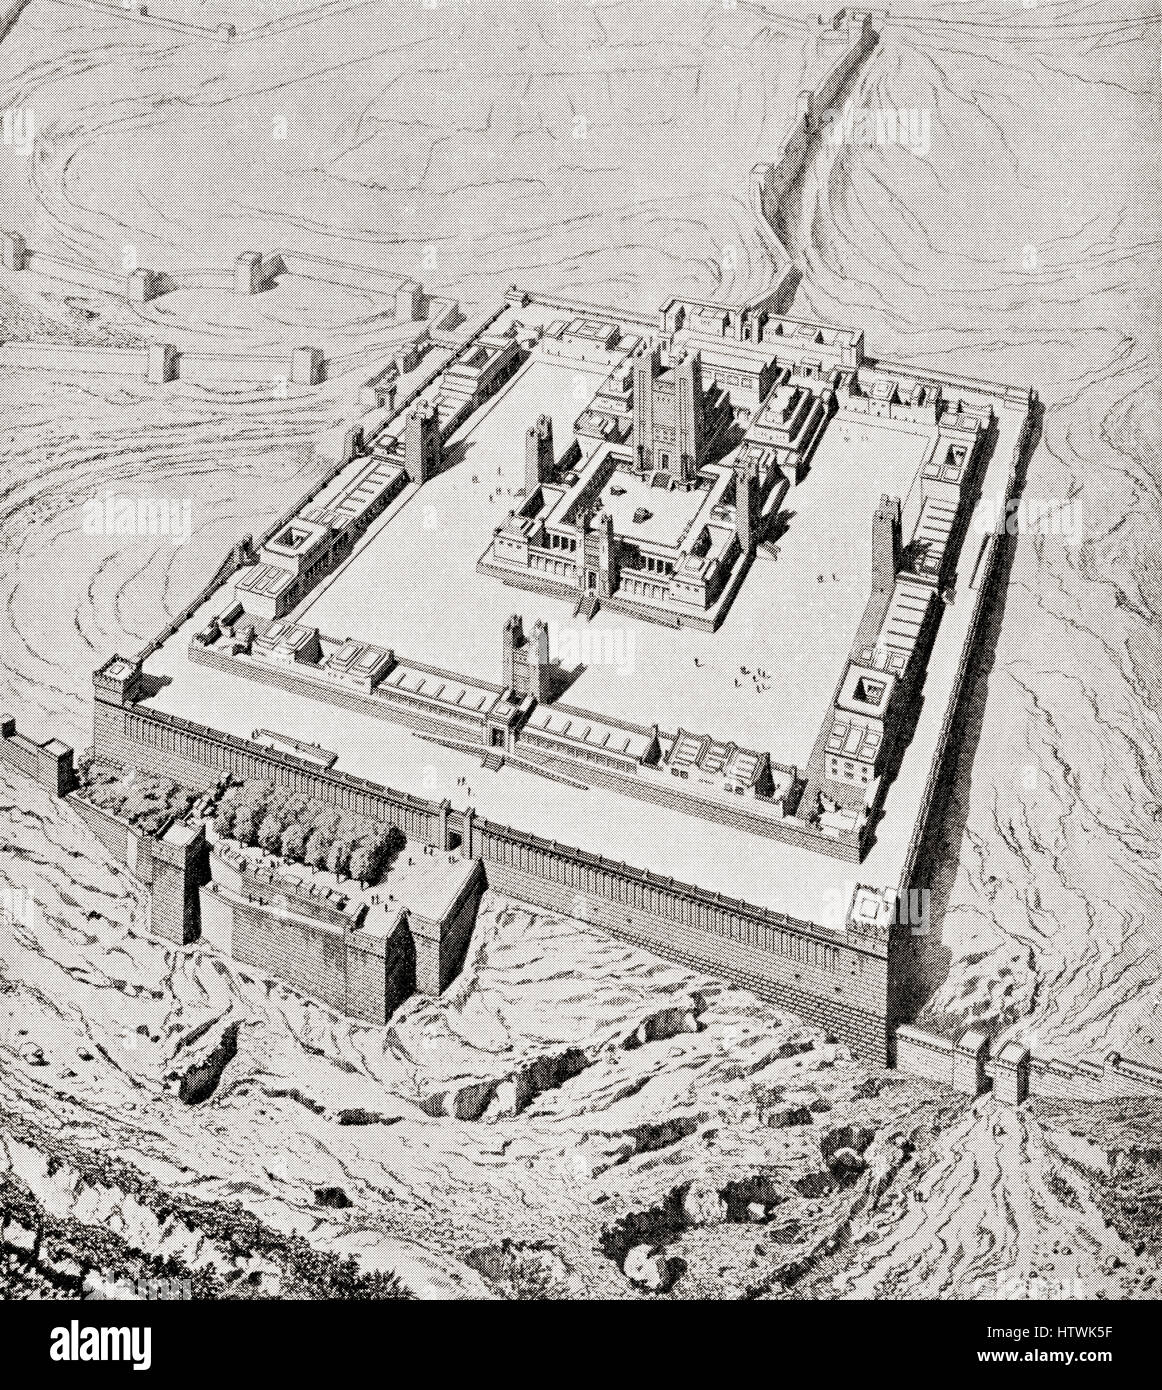 Artist's interpretation of Solomon's Temple, Jerusalem before its destruction by Nebuchadnezzar II after the Siege of Jerusalem of 587 BC.  From Hutchinson's History of the Nations, published 1915. Stock Photo